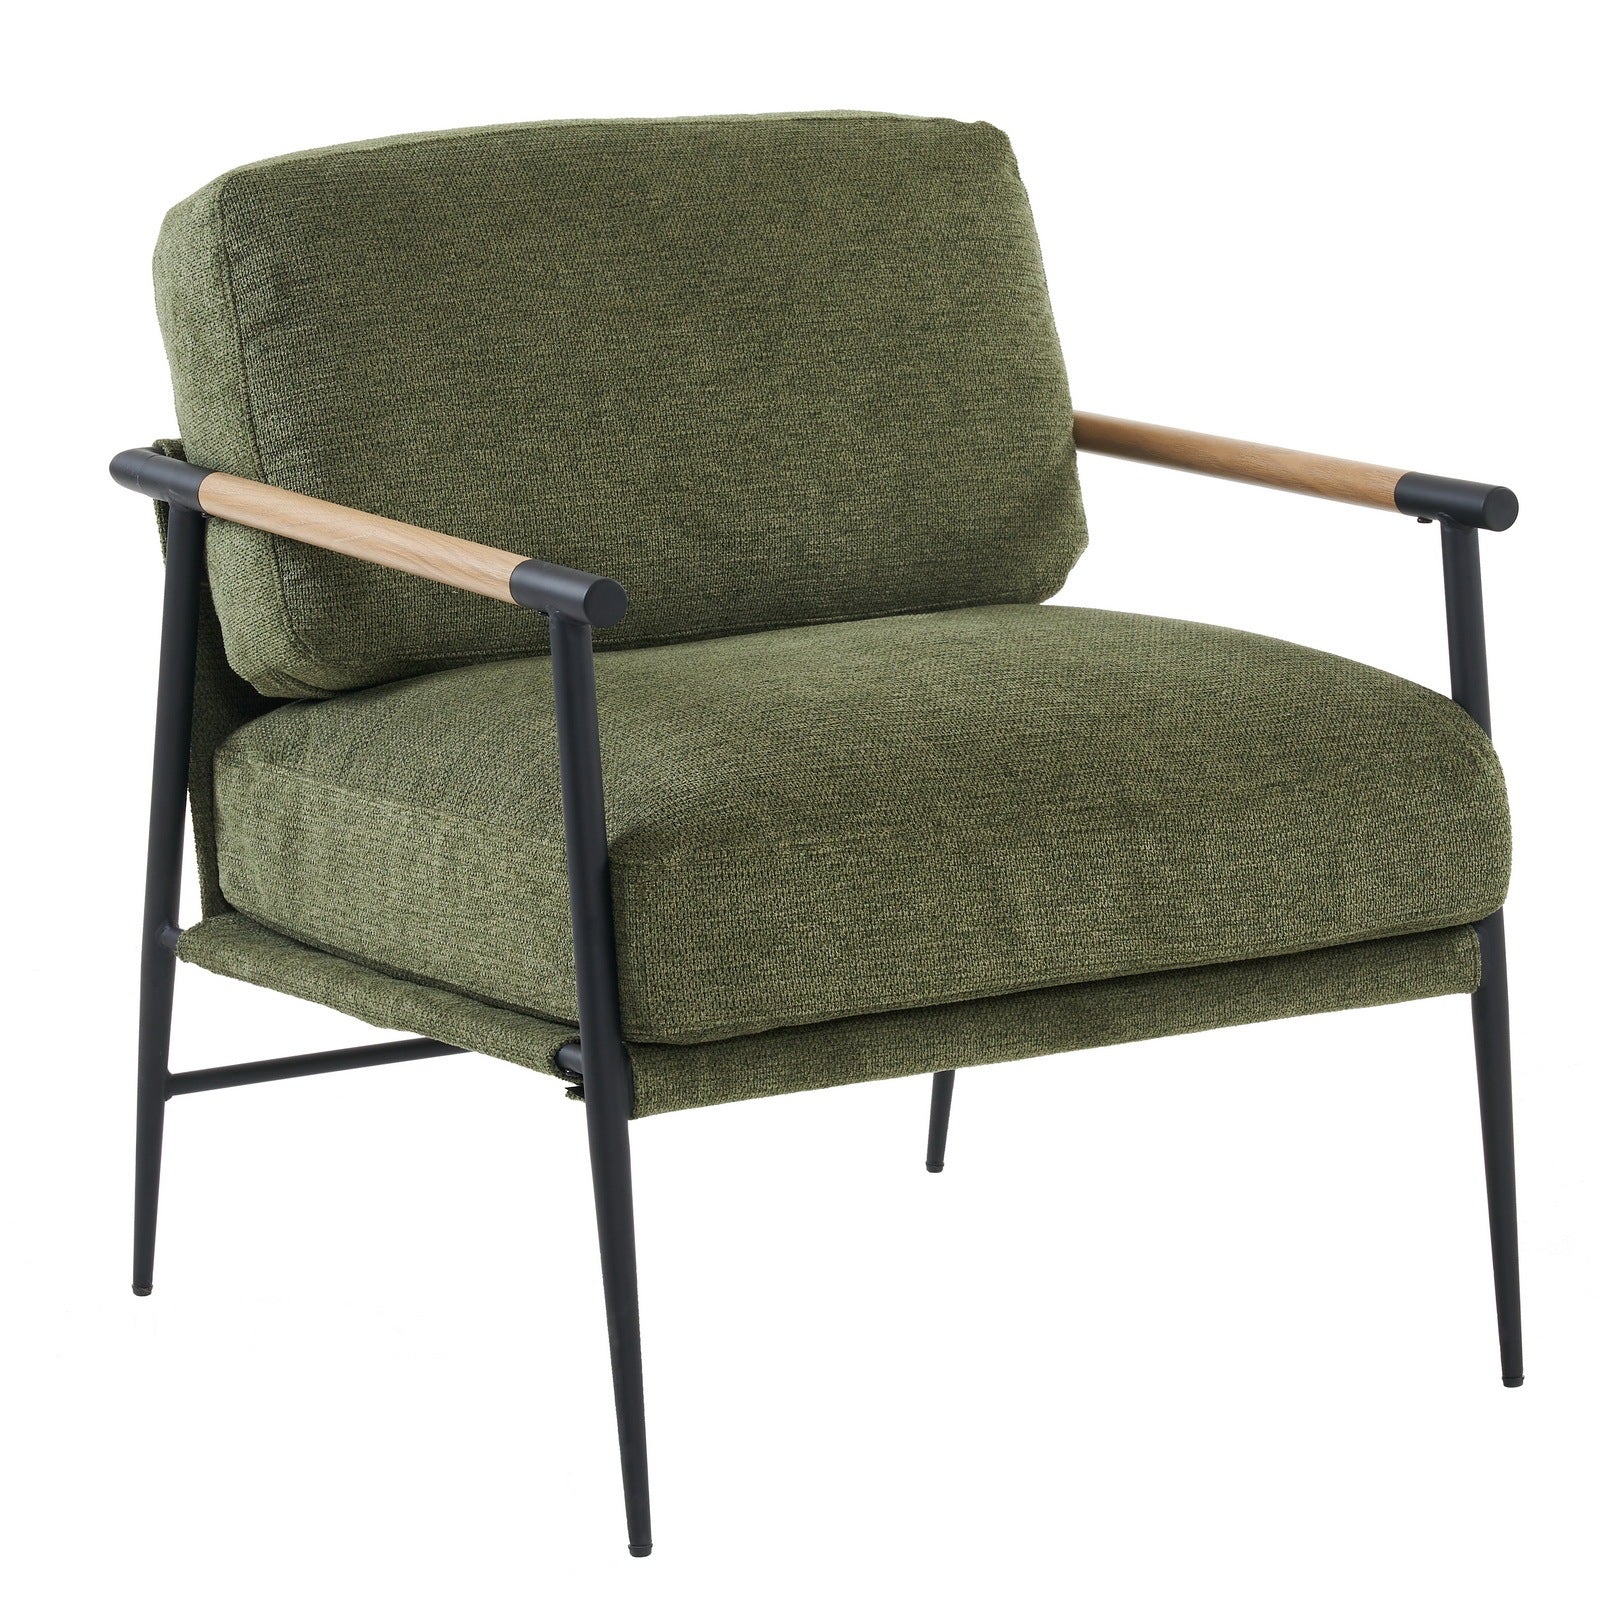 Leisure chair lounge chair Green color green-fabric